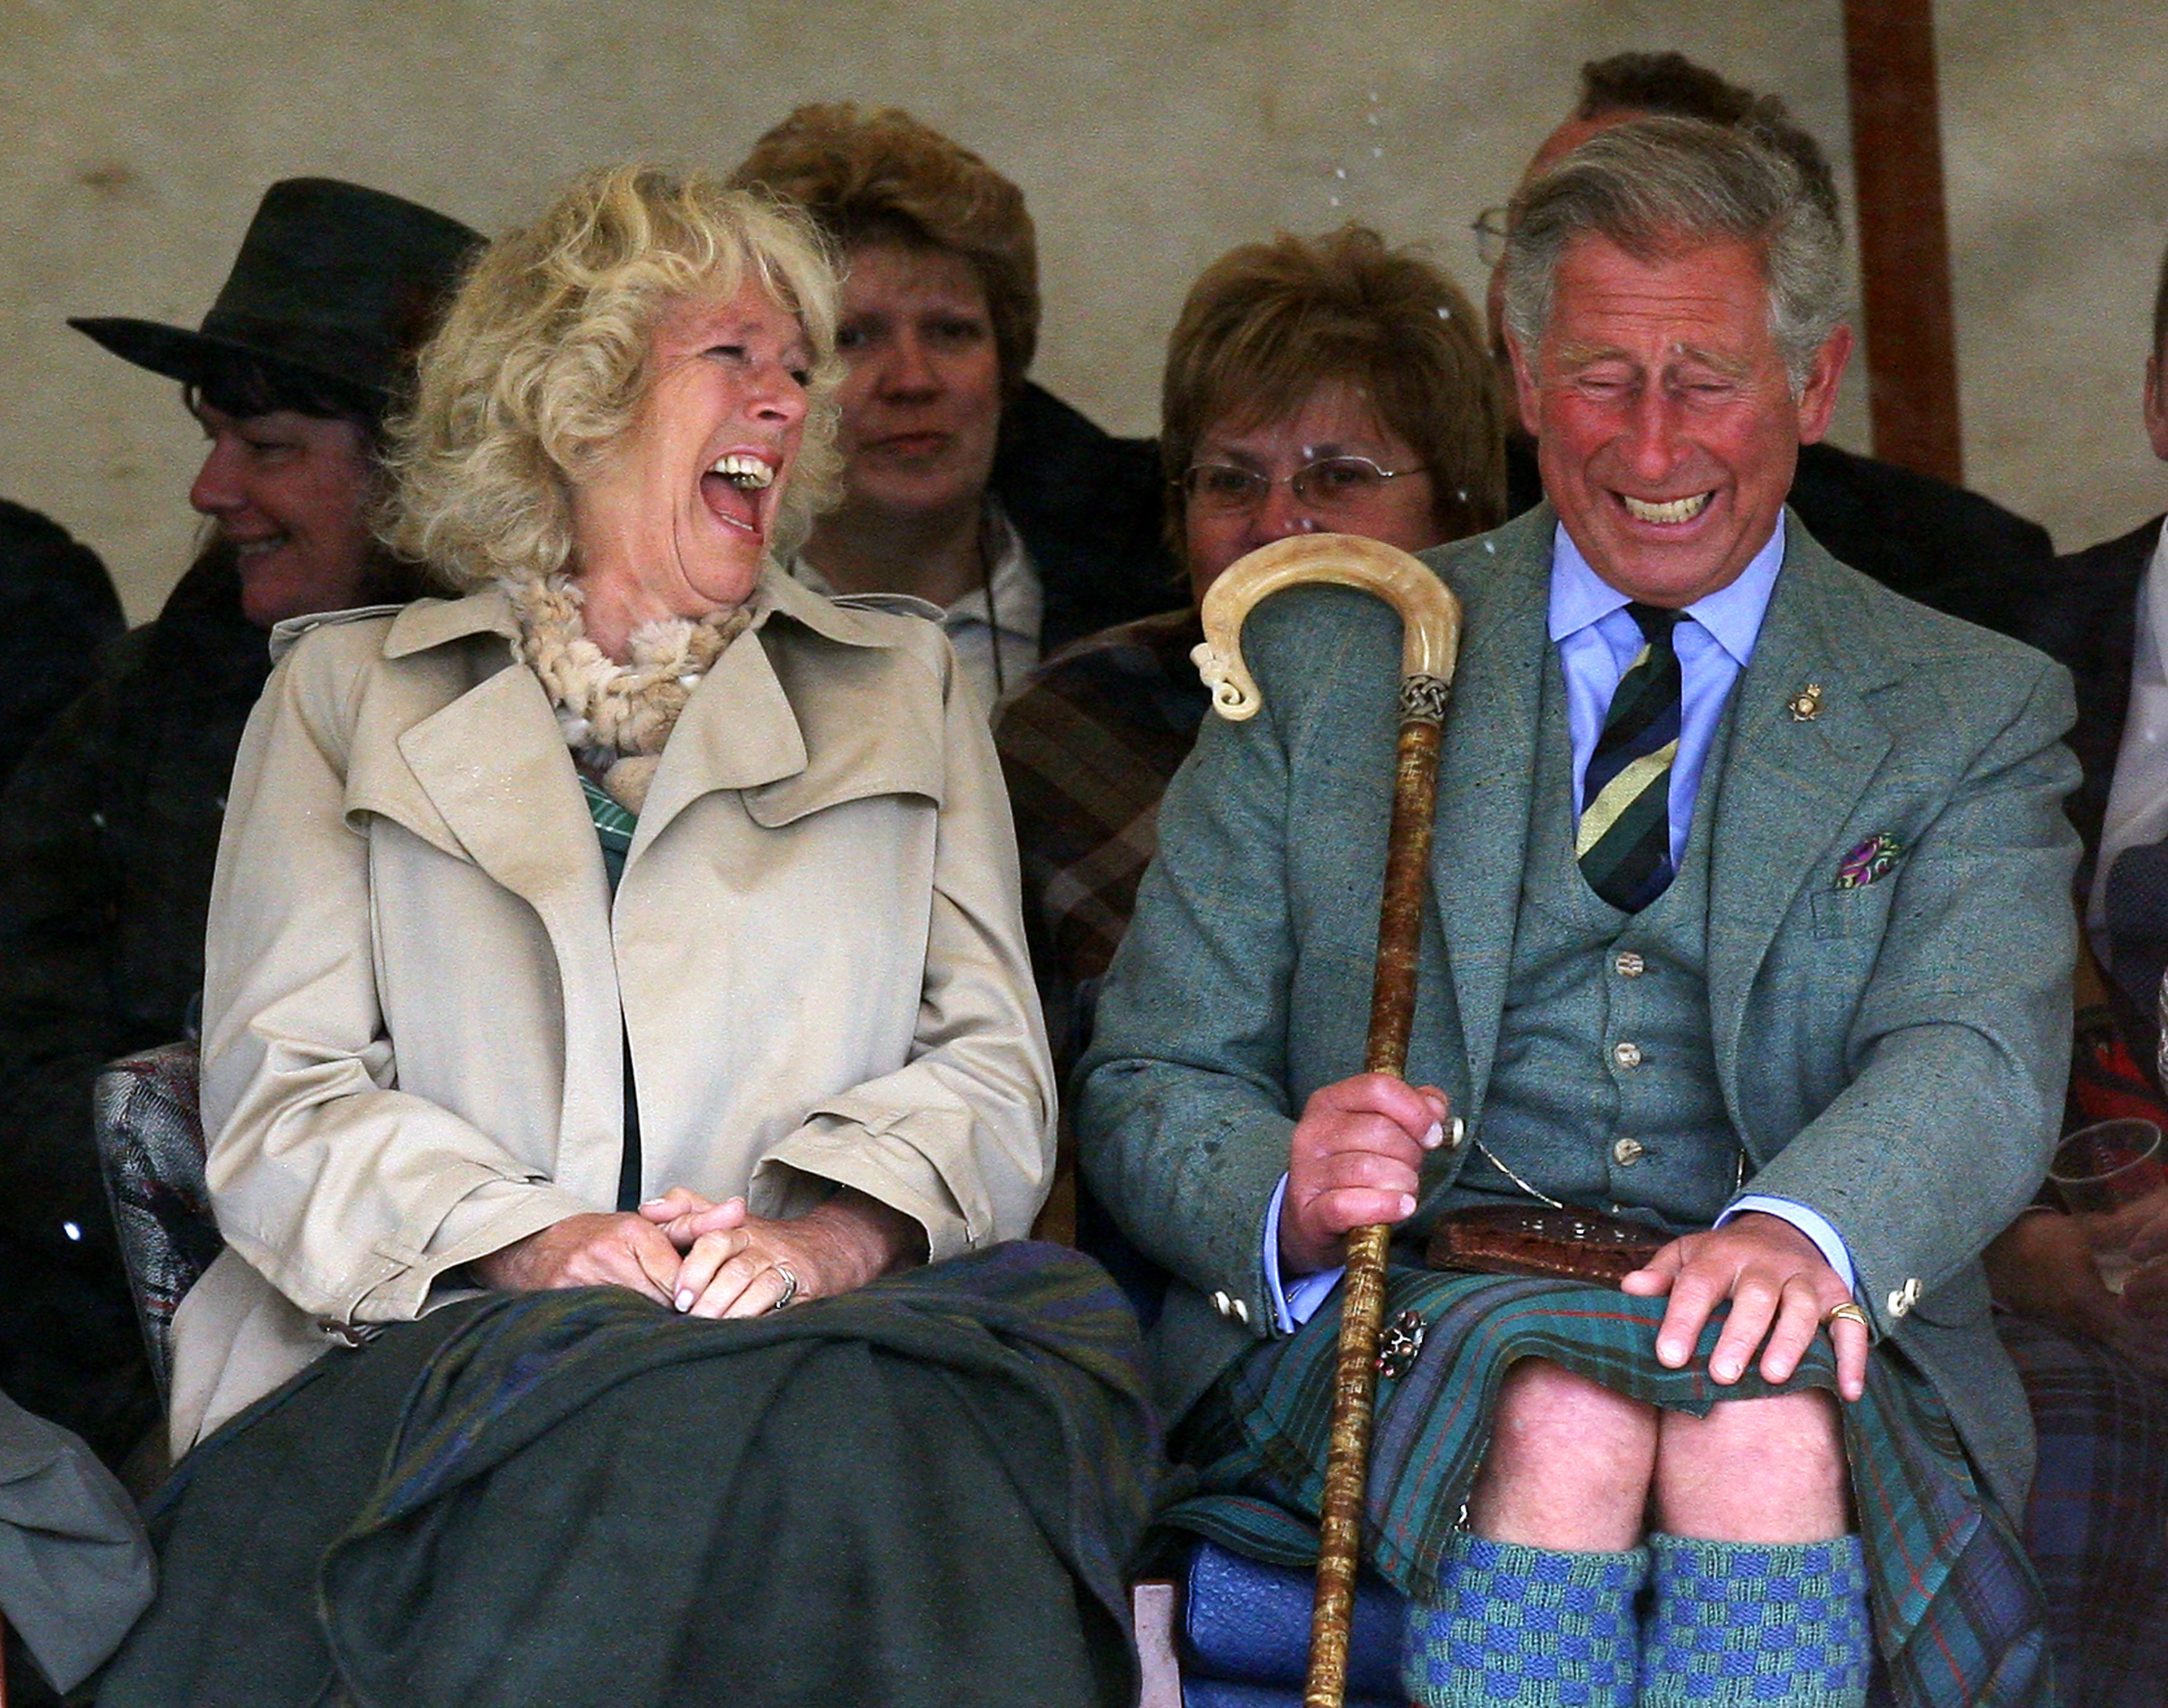 The then-Prince of Wales and Duchess of Cornwall enjoying the Mey Highland games in Caithness 